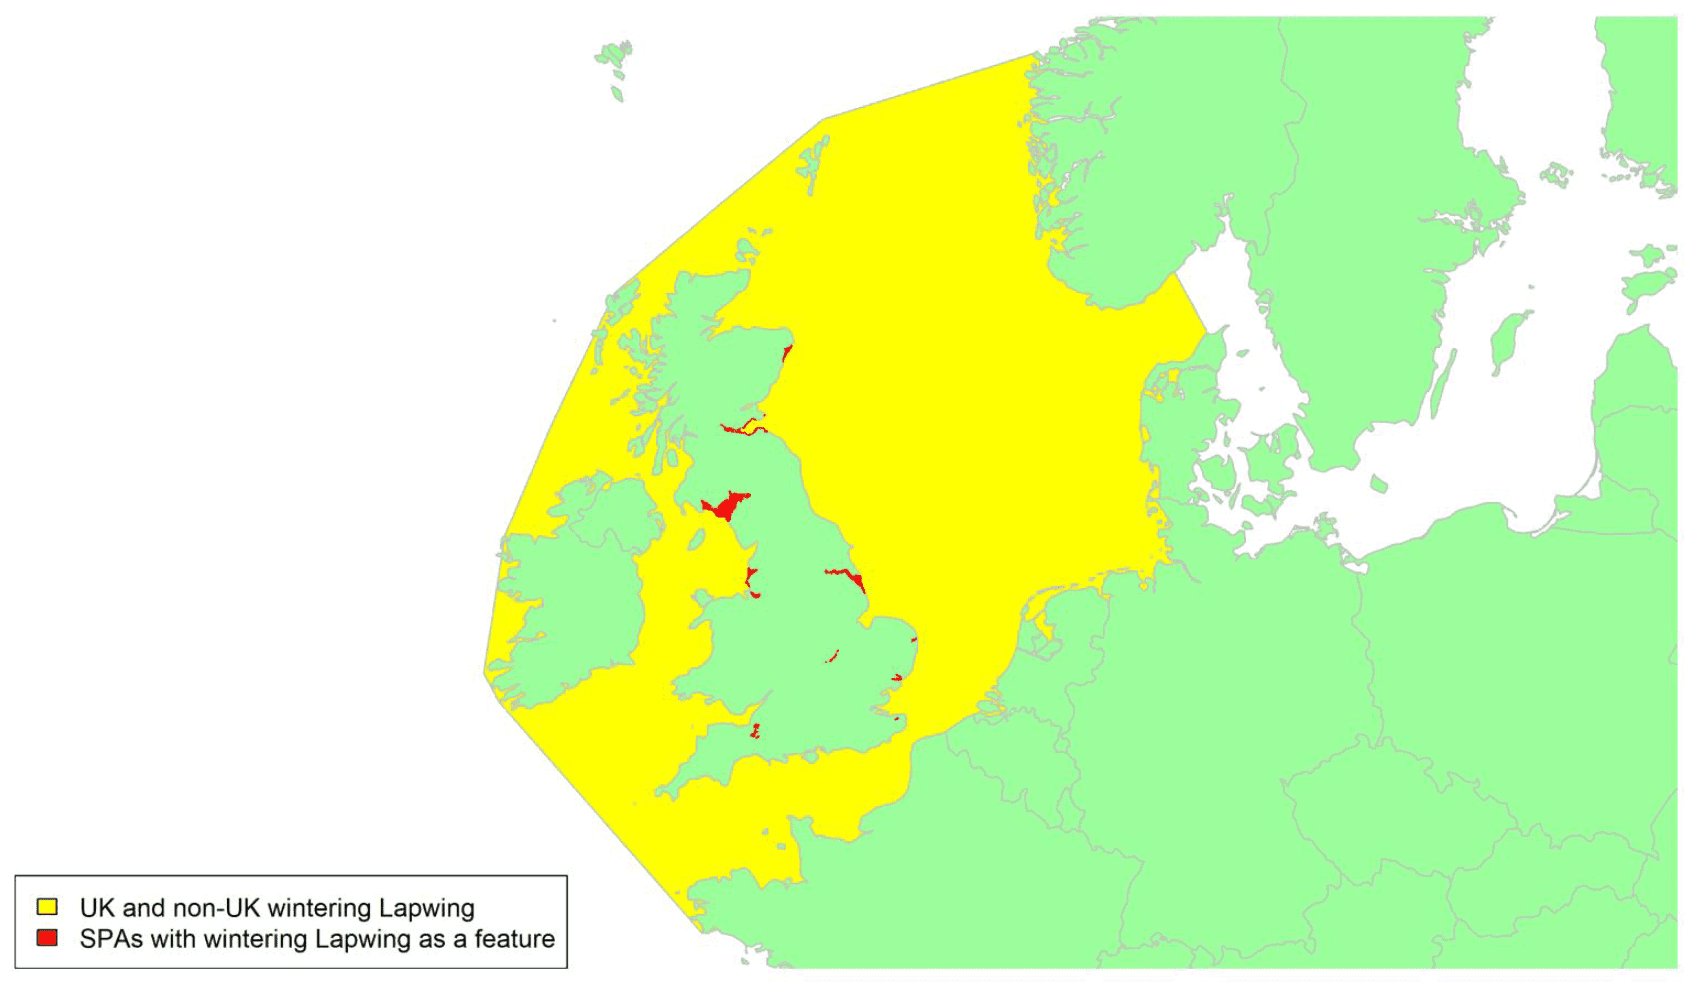 Map of North West Europe showing migratory routes and SPAs within the UK for Lapwing as described in the text below.